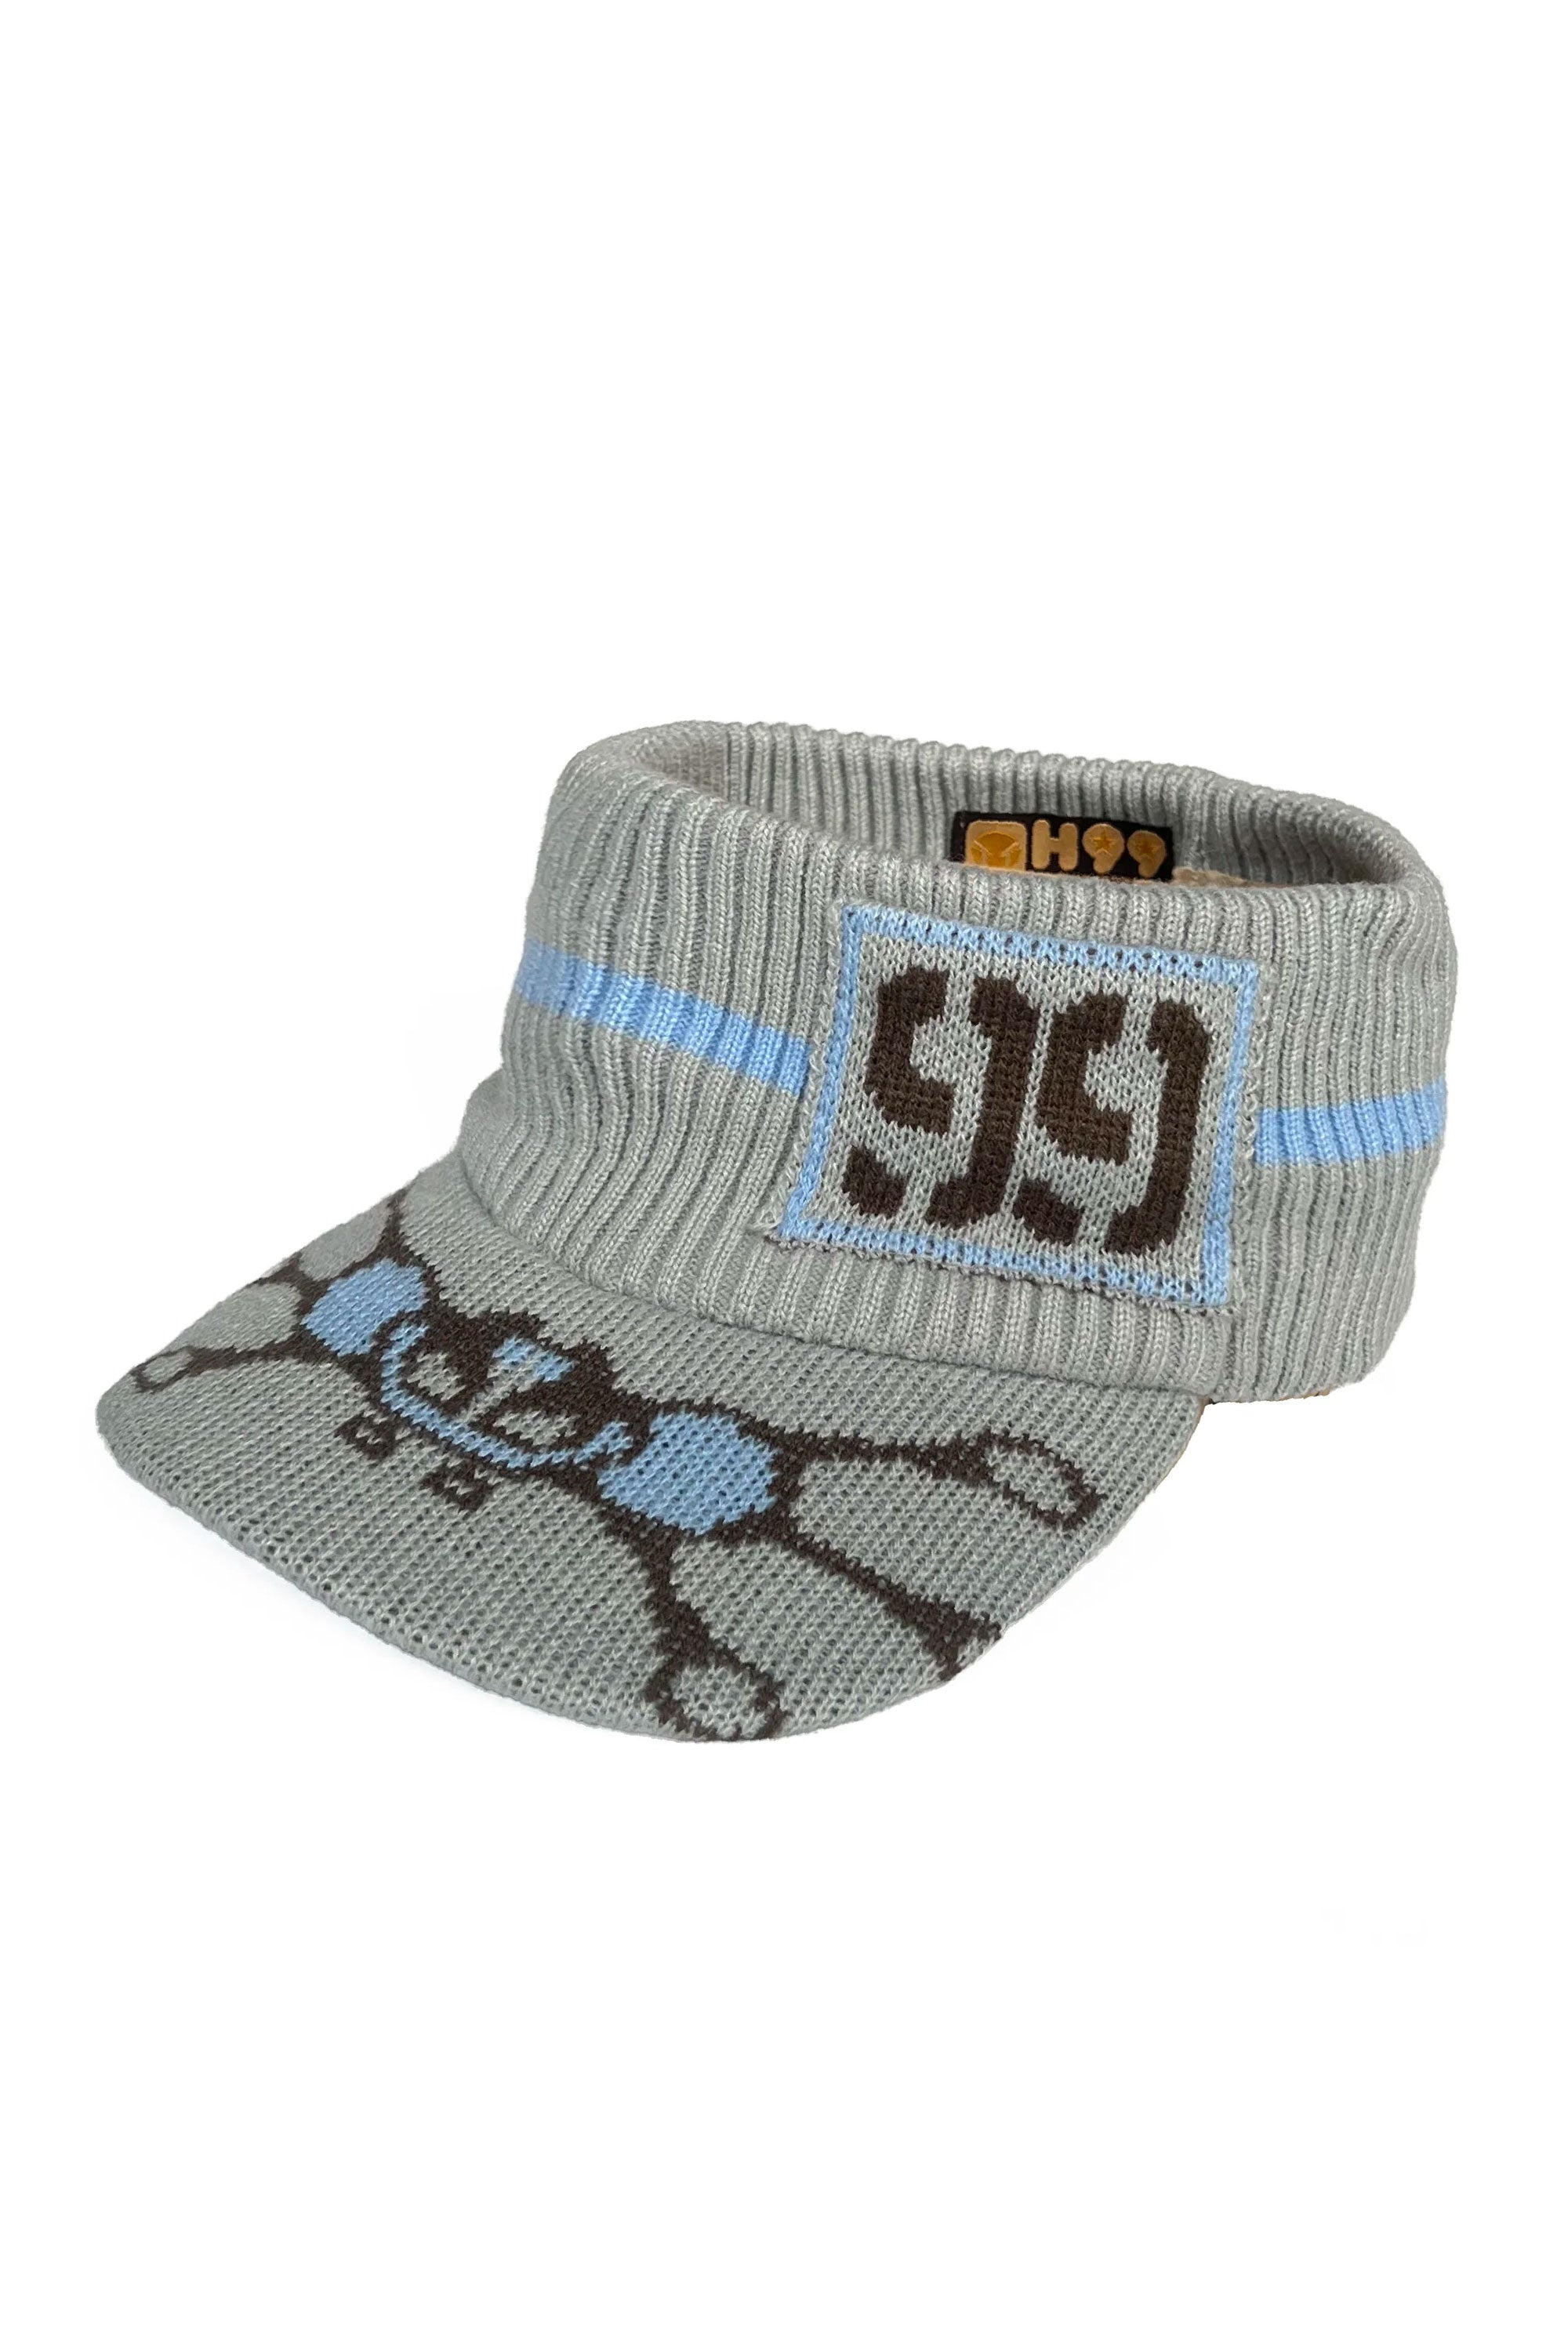 The HAPPY 99 - KNIT VISOR GREY BLUE available online with global shipping, and in PAM Stores Melbourne and Sydney.